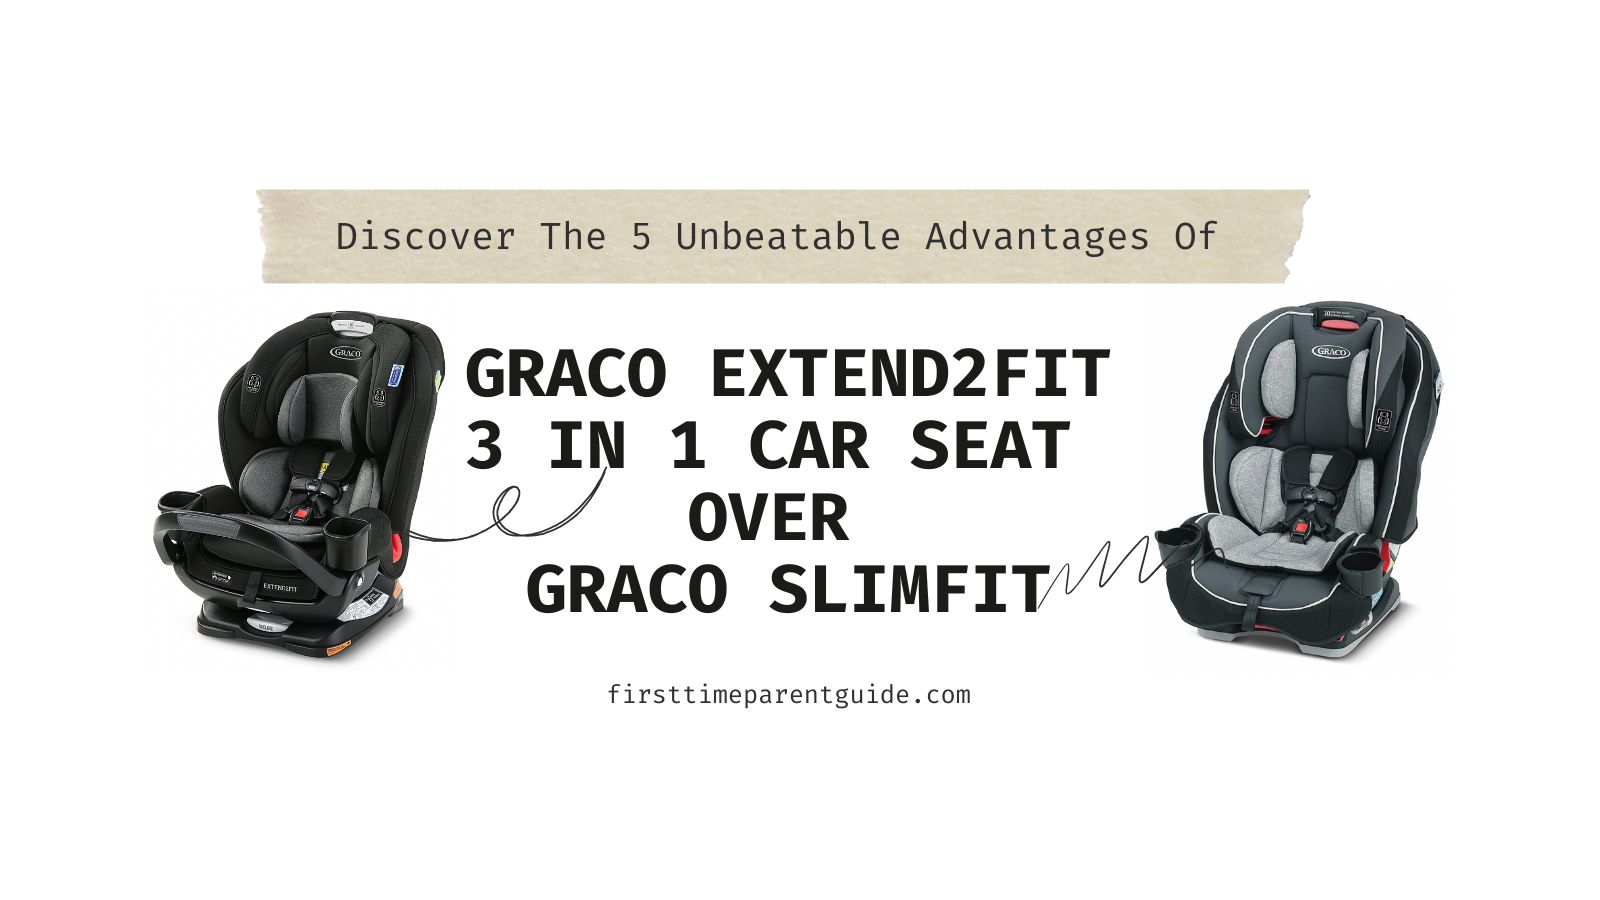 Graco Extend2fit 3 in 1 Car Seat